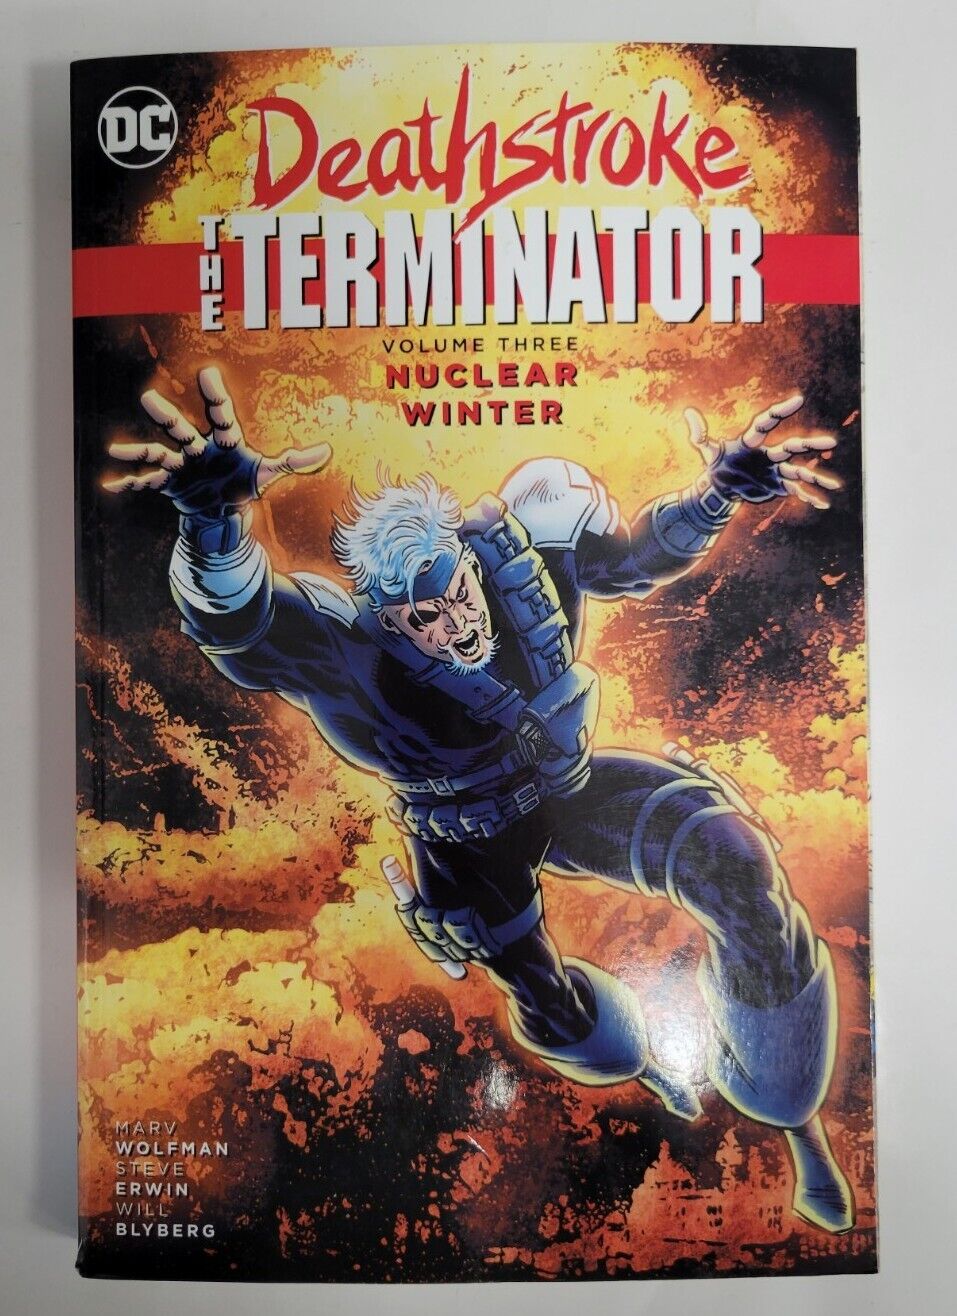 Deathstroke The Terminator - NUCLEAR WINTER Vol 3 - Graphic Novel TPB - DC